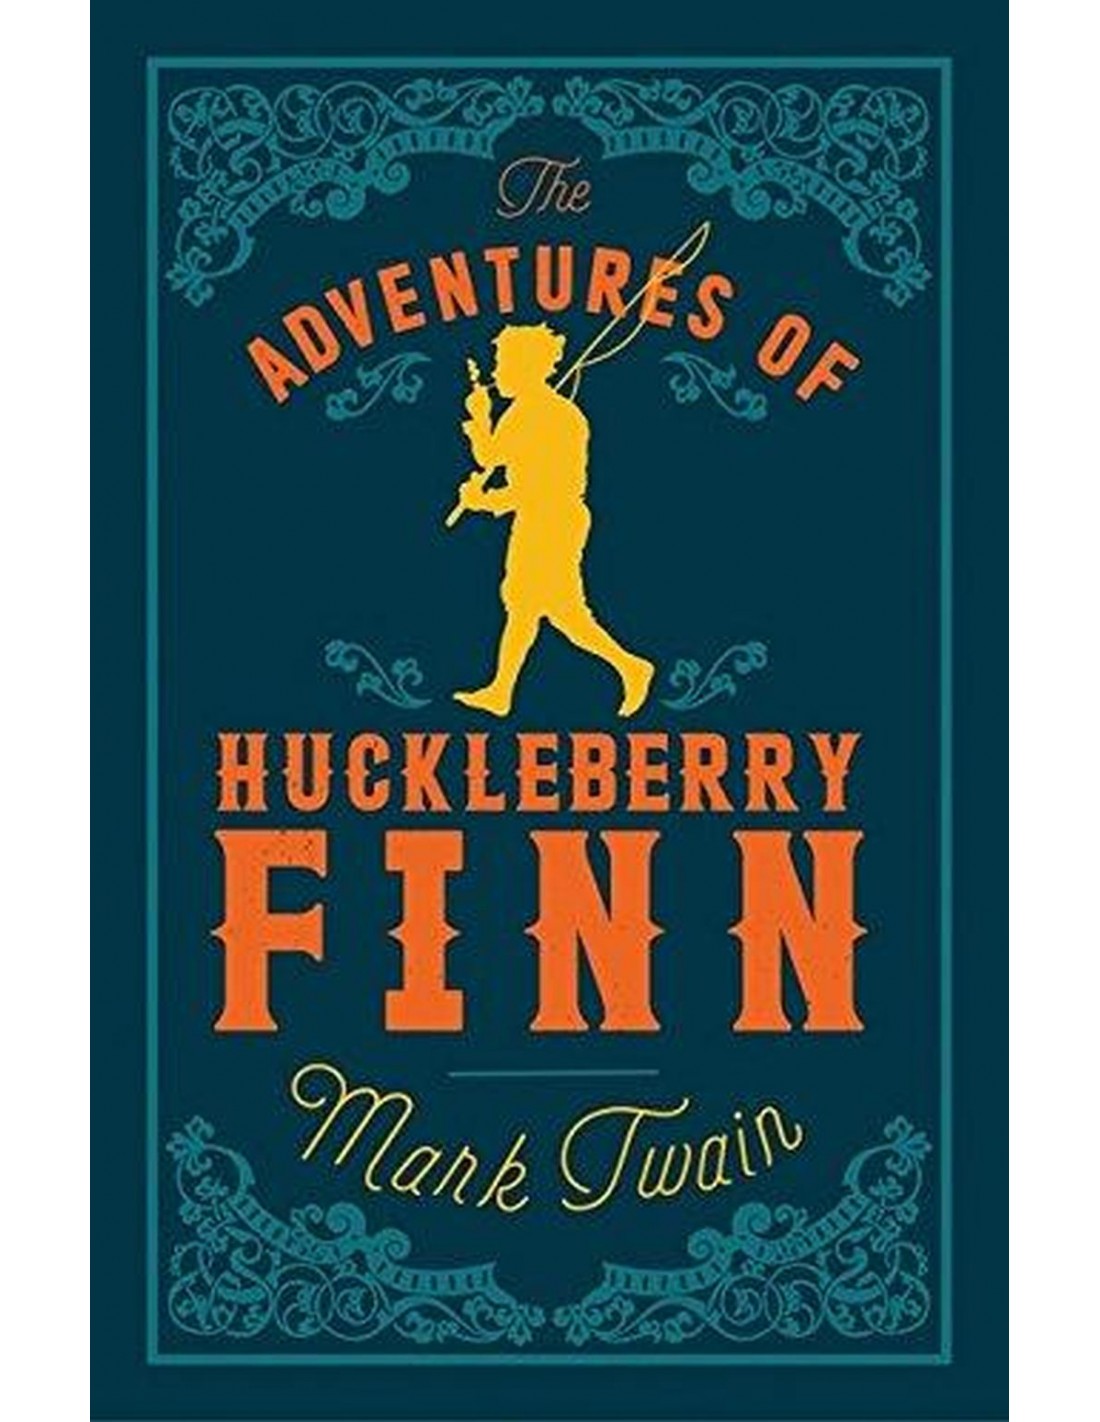 for ios download The Adventures of Huckleberry Finn